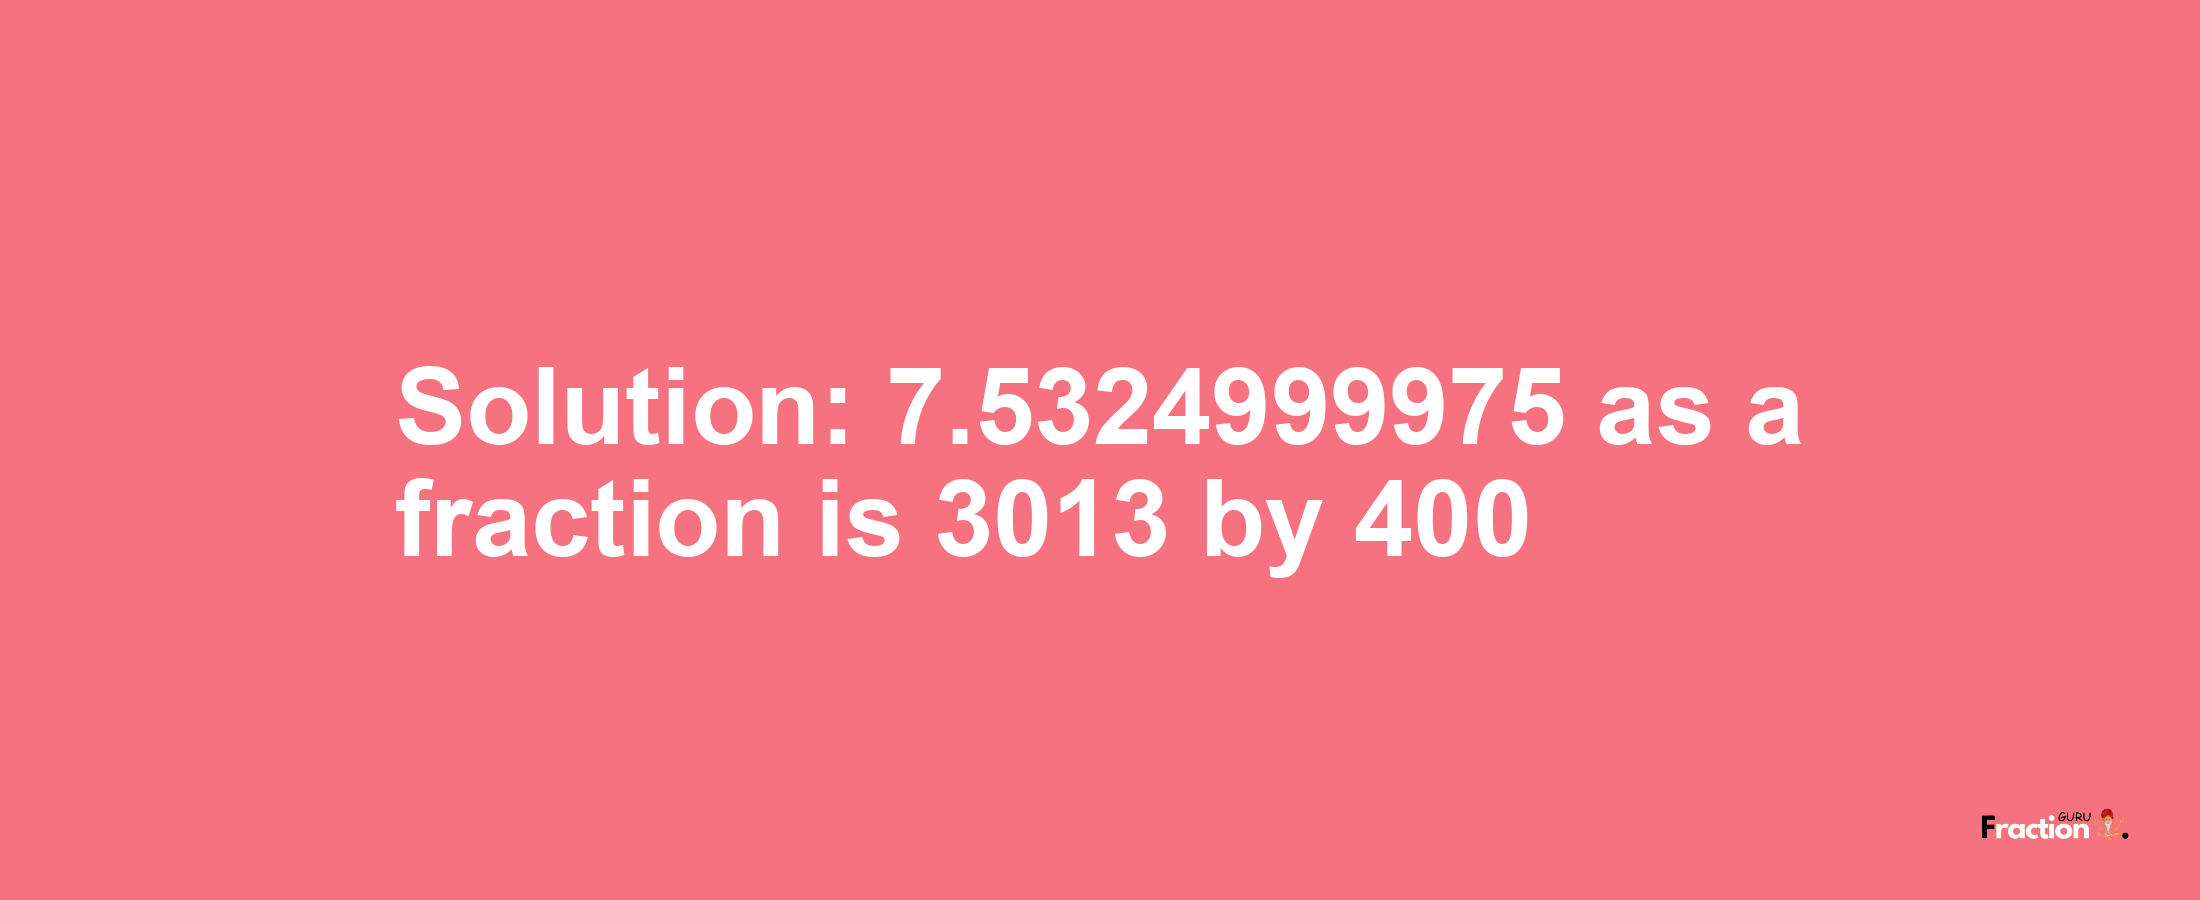 Solution:7.5324999975 as a fraction is 3013/400